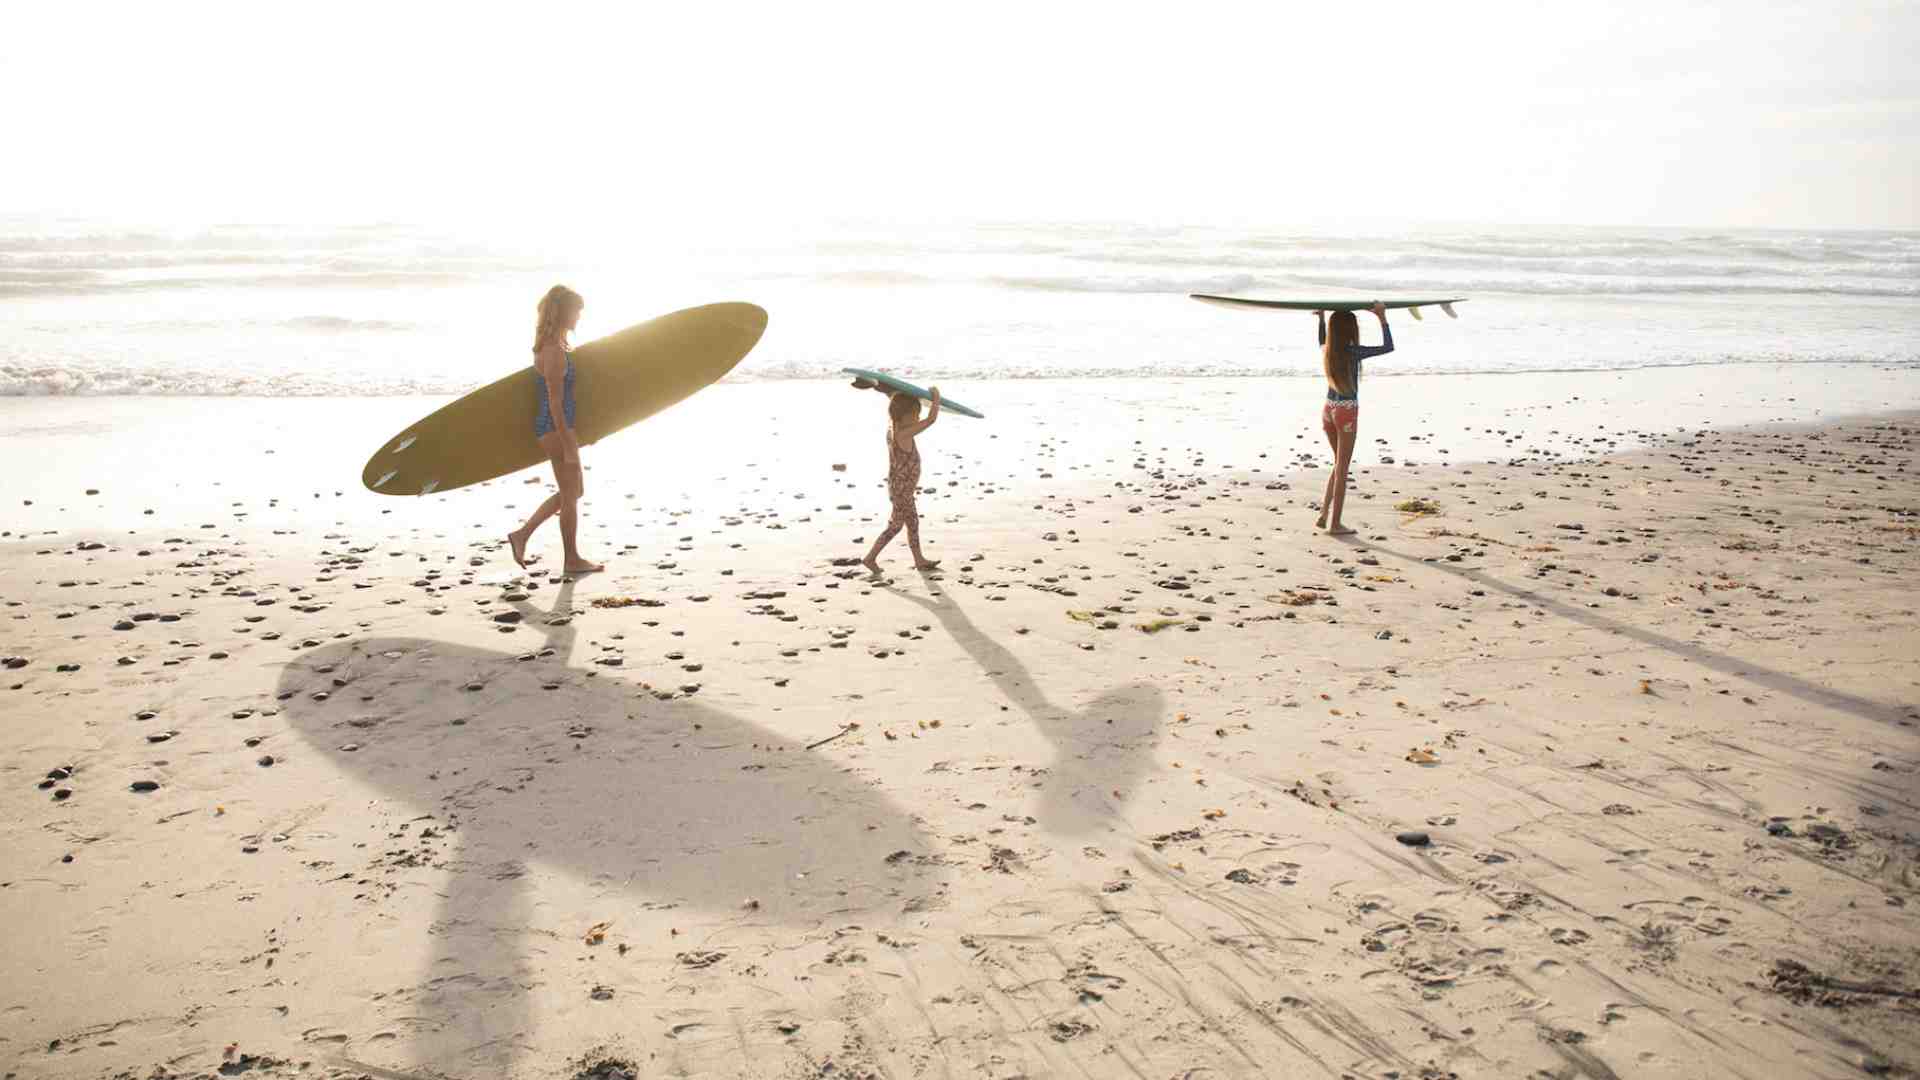 Why is surfing so addictive?